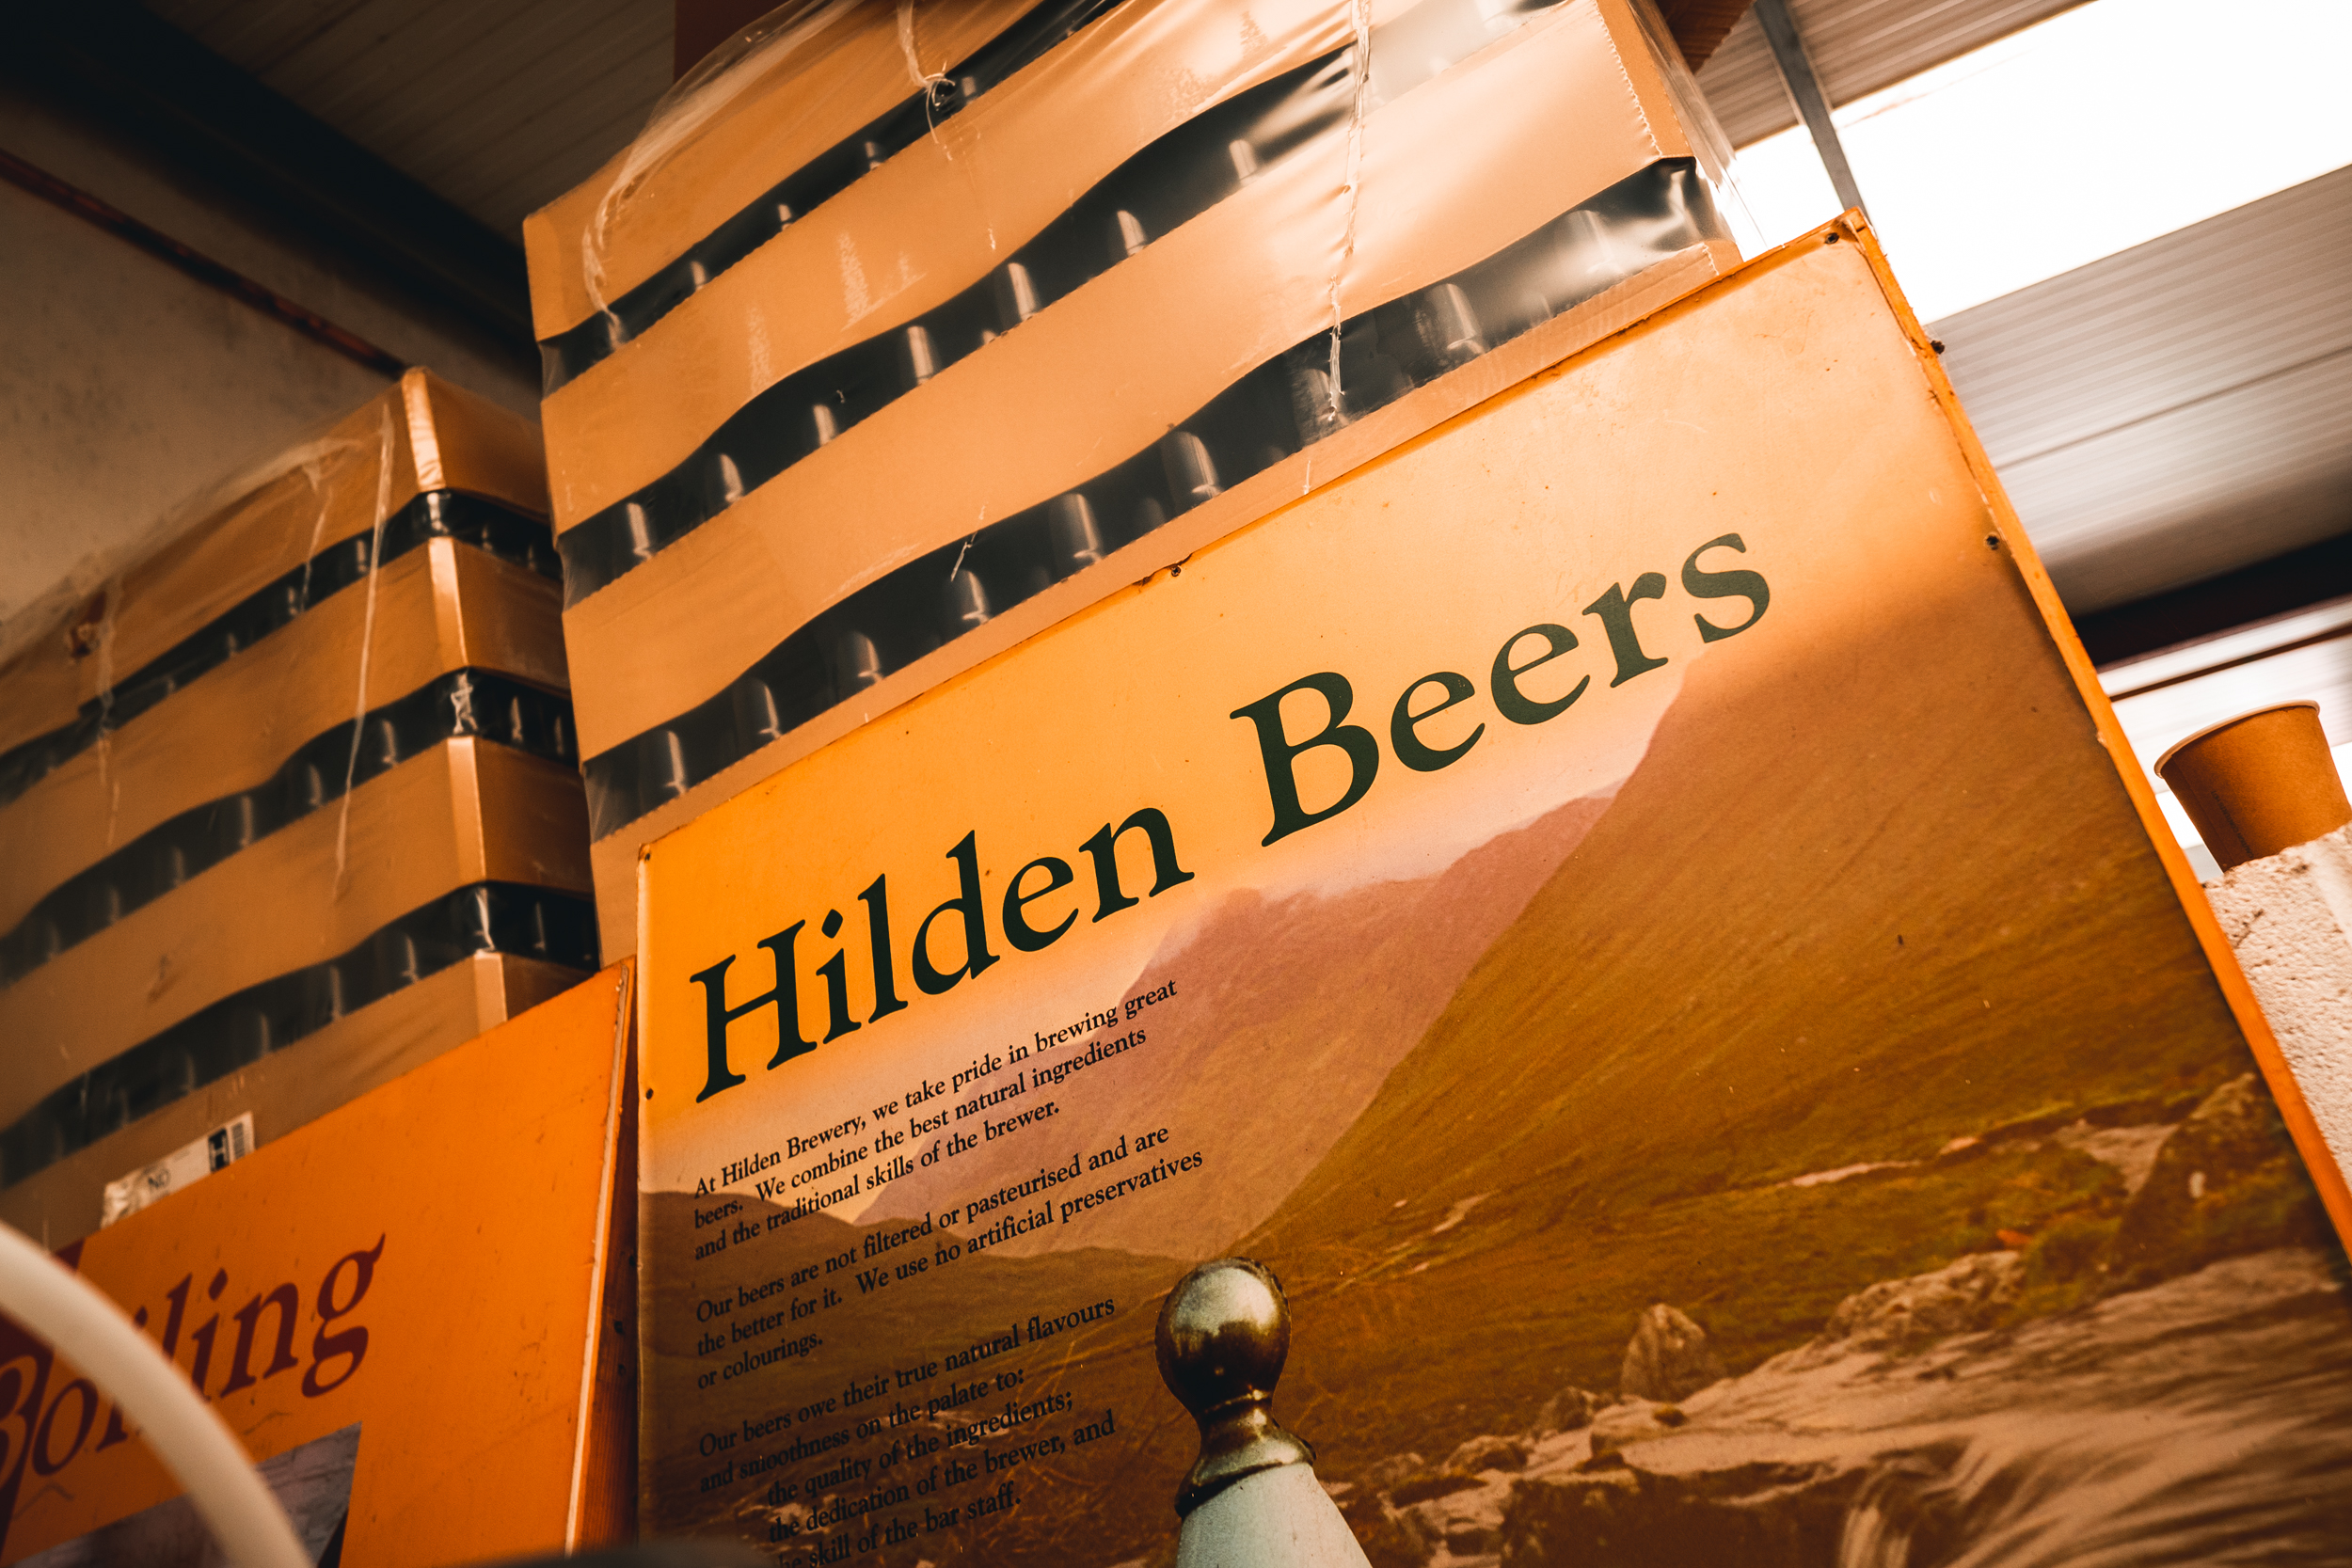 Fancy a Christmas evening at Hilden Brewery?